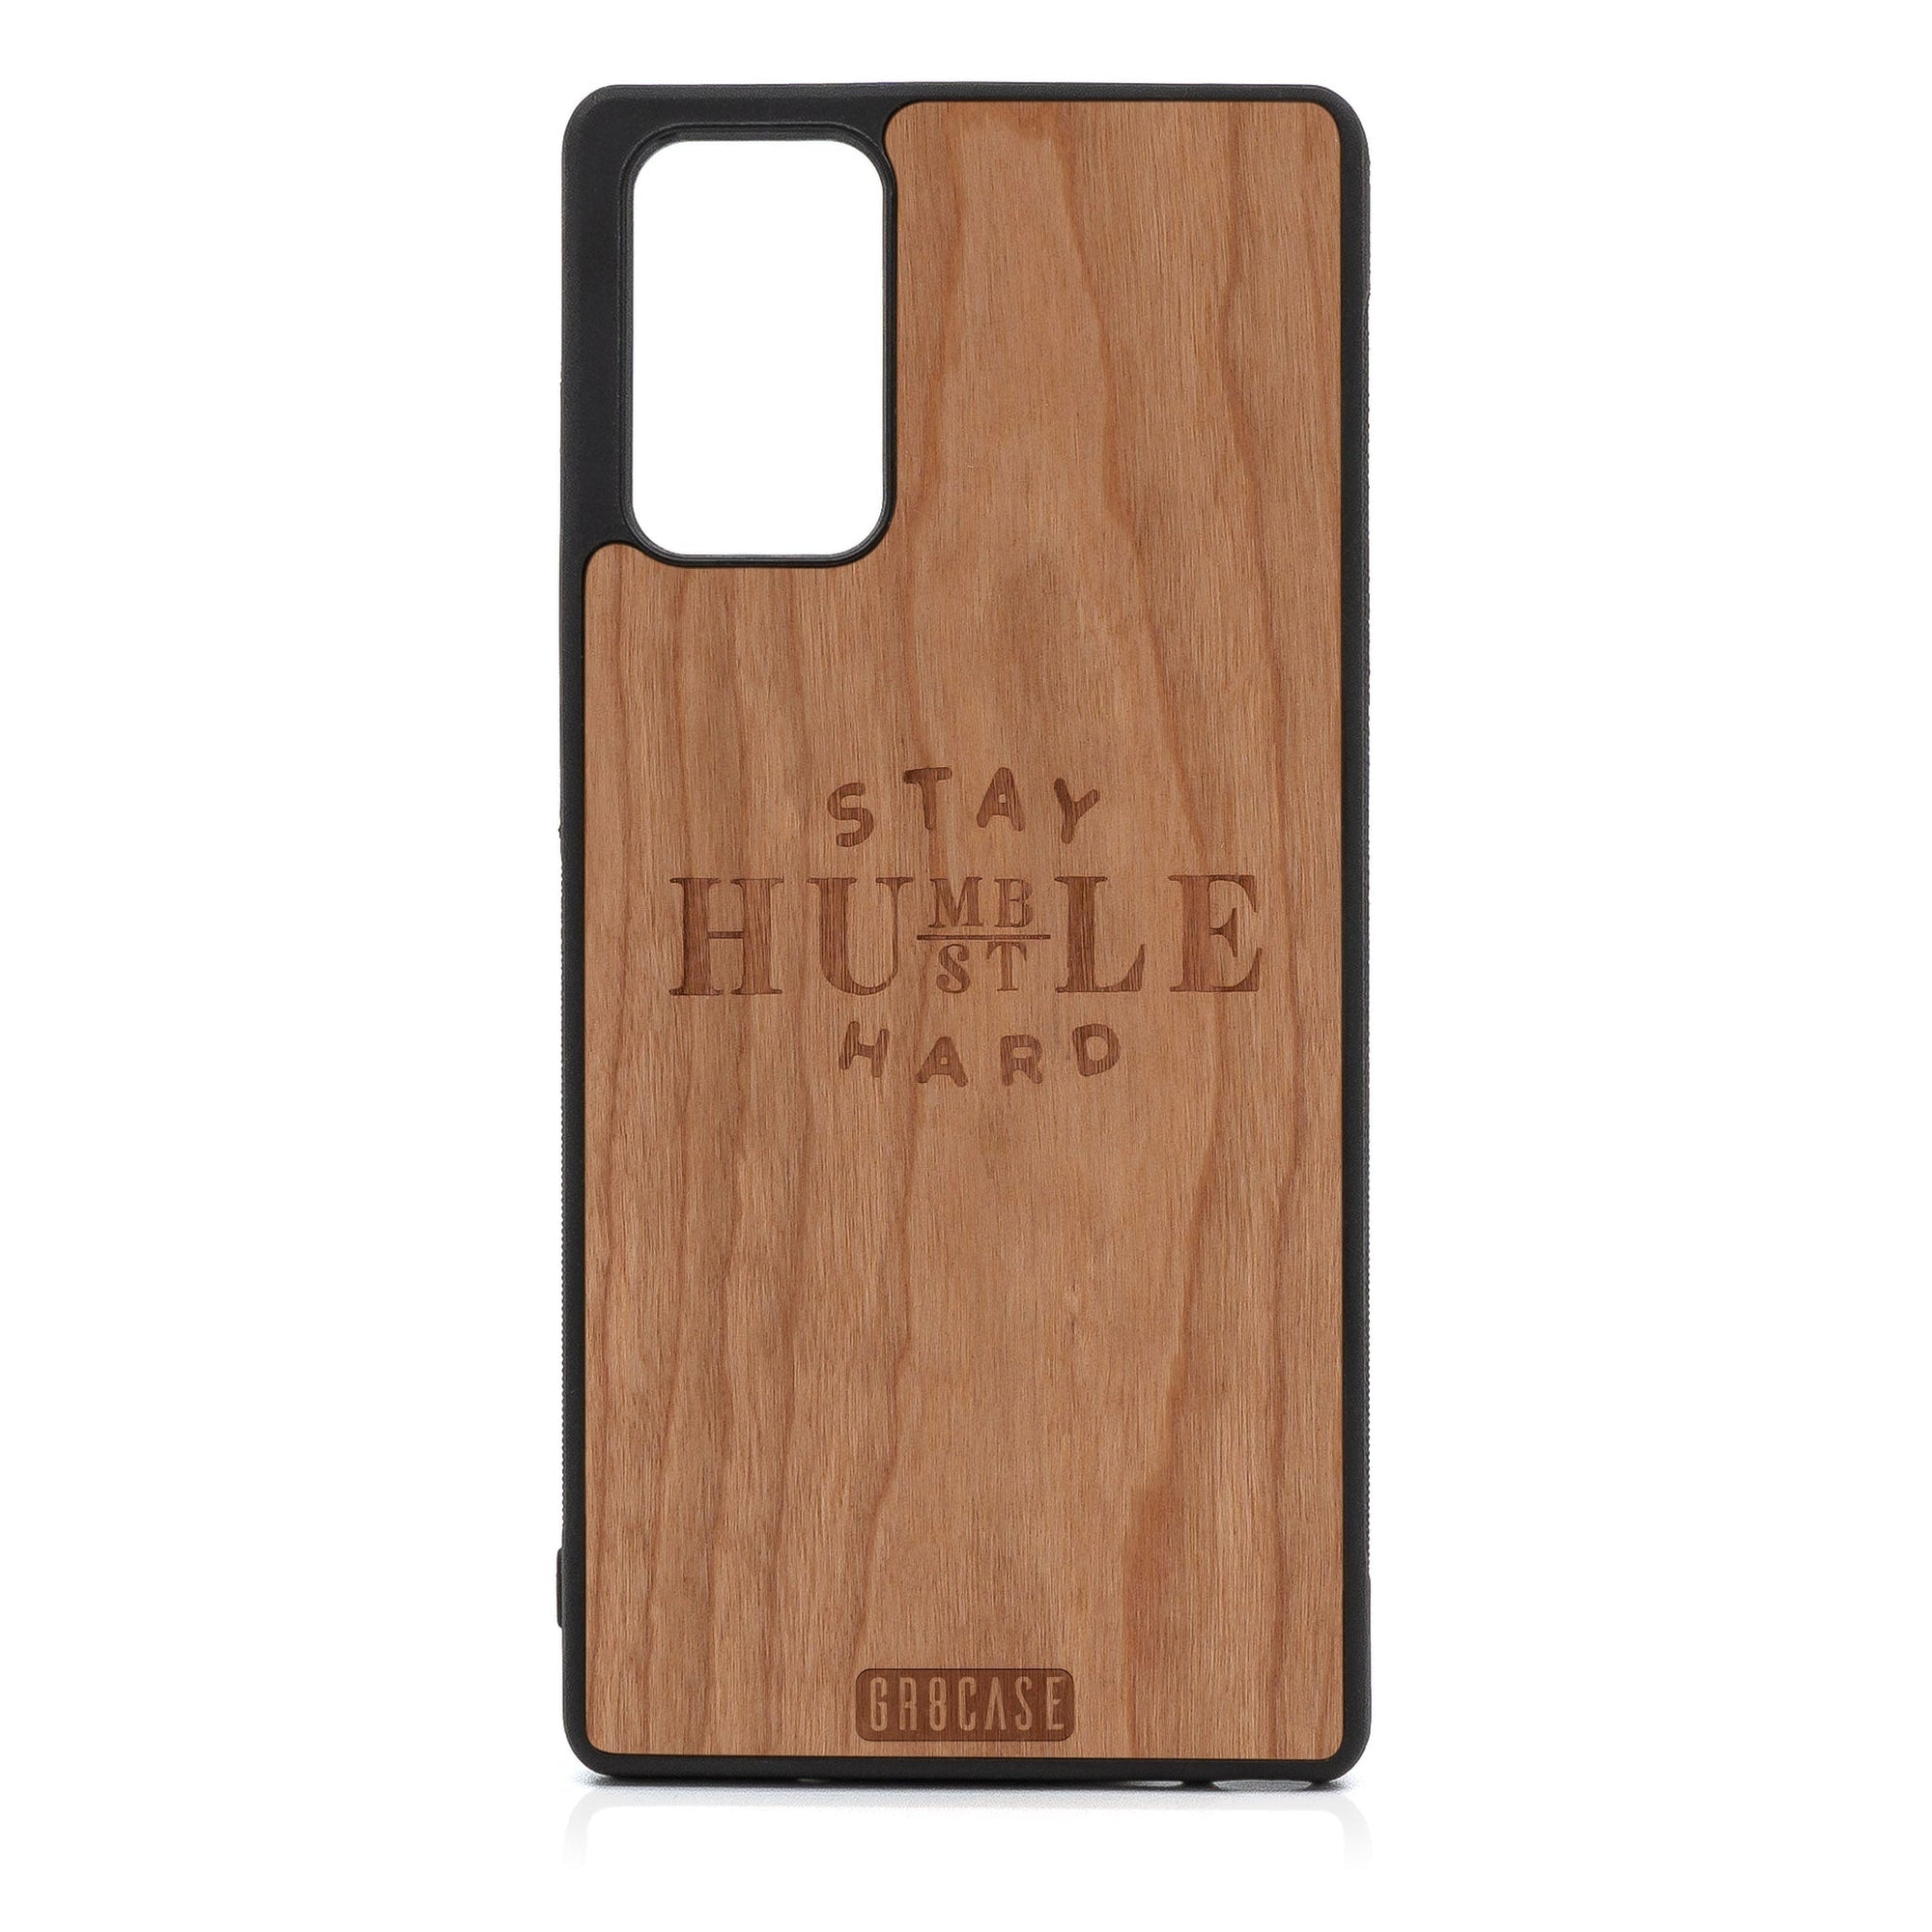 Stay Humble Hustle Hard Design Wood Case For Samsung Galaxy A71 5G